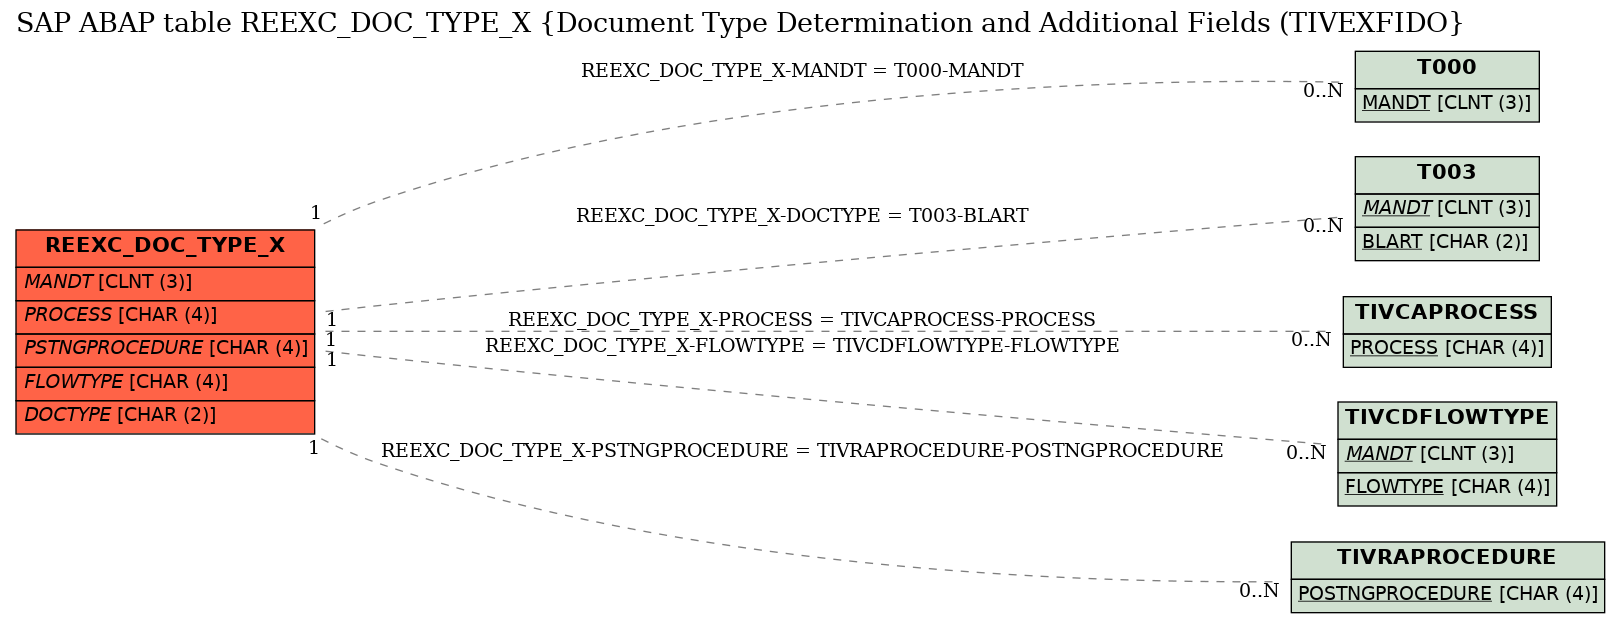 E-R Diagram for table REEXC_DOC_TYPE_X (Document Type Determination and Additional Fields (TIVEXFIDO)